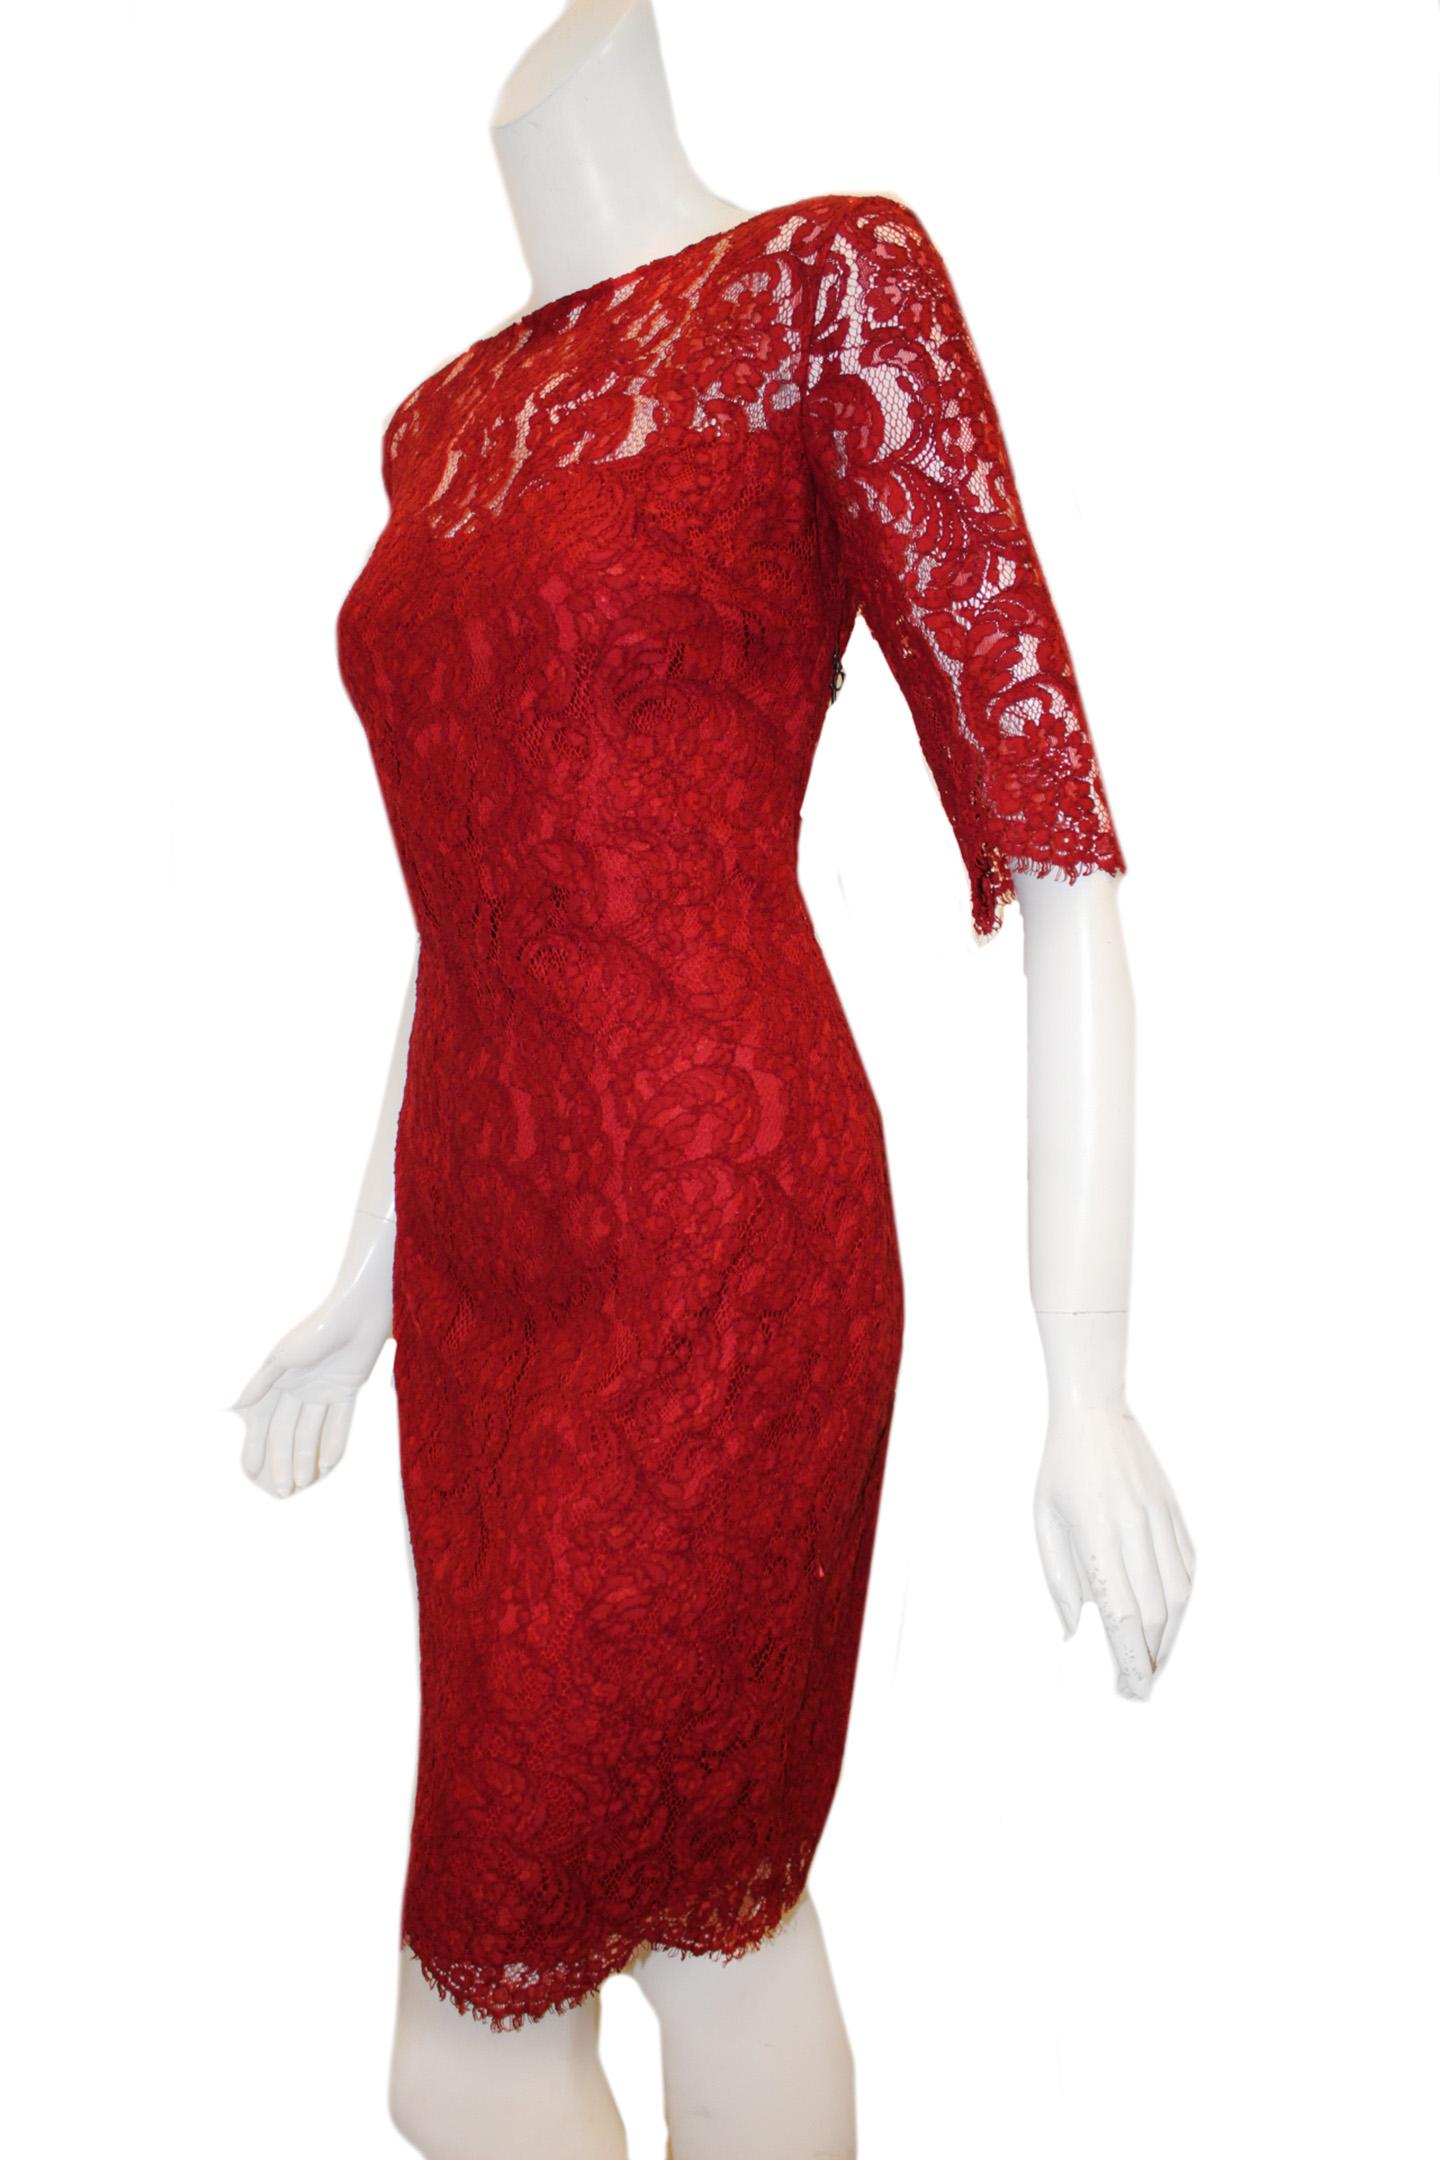 Pamella Roland Ruby red lace dress is showing of the shoulders and arms since this part of the dress is not lined.  The to the elbow sleeves are scalloped at edges for a more feminine look.  The dress is fitted to the body and lined in ruby red